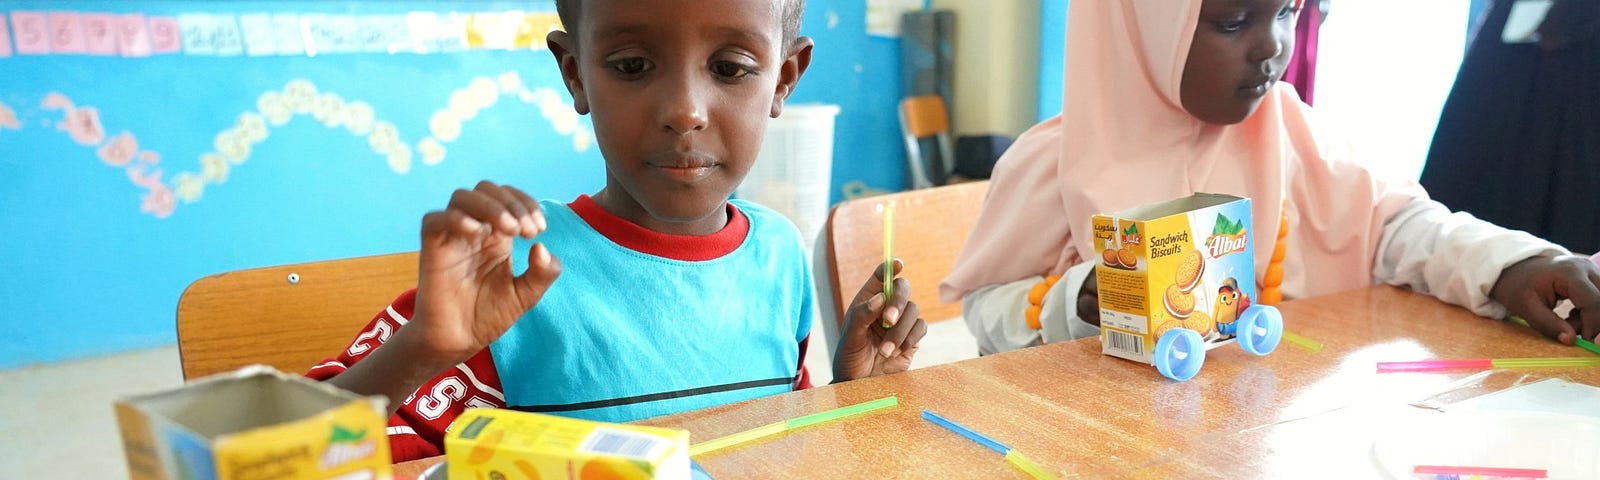 A boy and girl sit at their work stations at school with the toy cars they have built with small recycled cardboard boxes, colorful drinking straws, and little blue wheels.